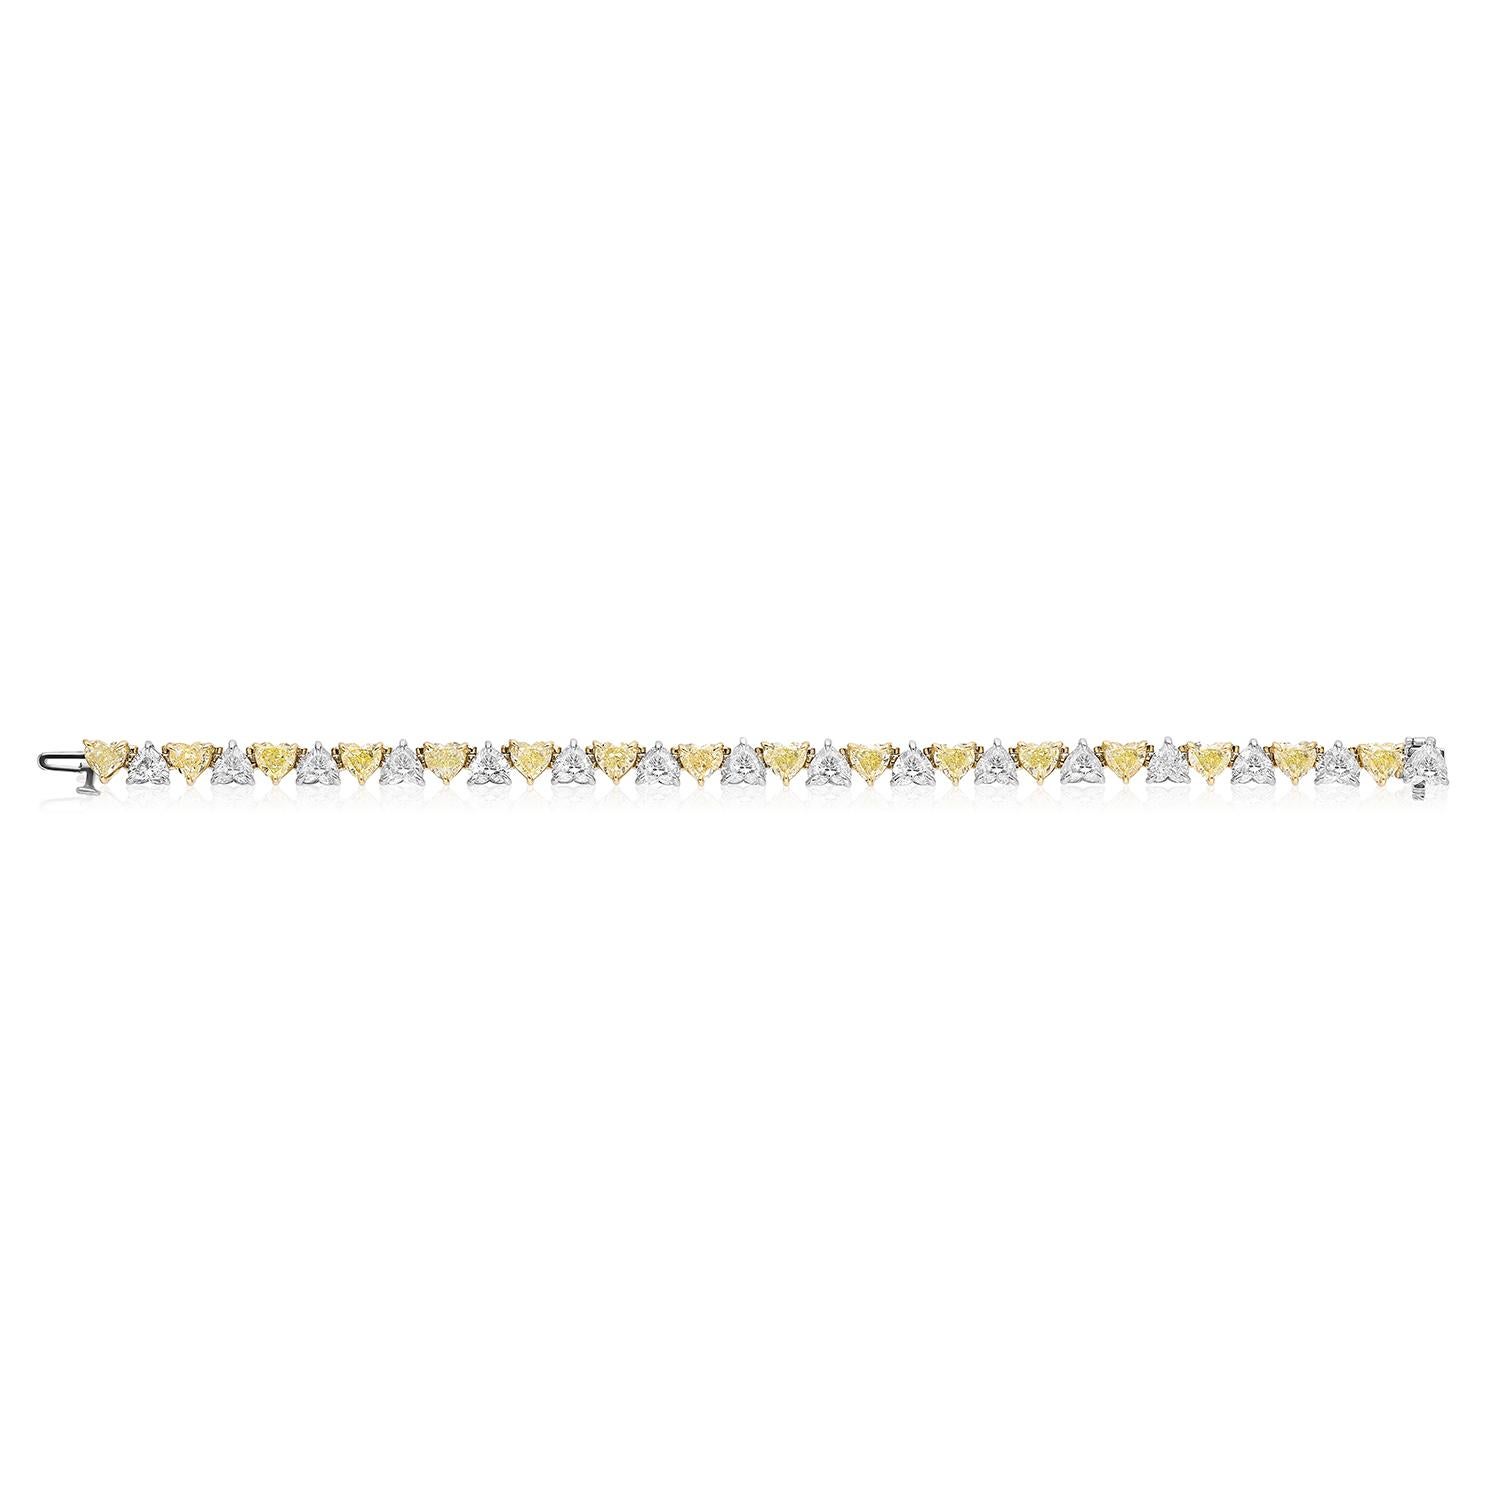 Gorgeous and Unique Yellow and White Diamond Bracelet.
16 Heart Shaped Yellow Diamonds weighing 8.45 Carats.
16 Heart Shaped Diamonds weighing 8.10 Carats.

Set in Platinum and 18 Karat Yellow Gold.
Measures 6.75 inches.